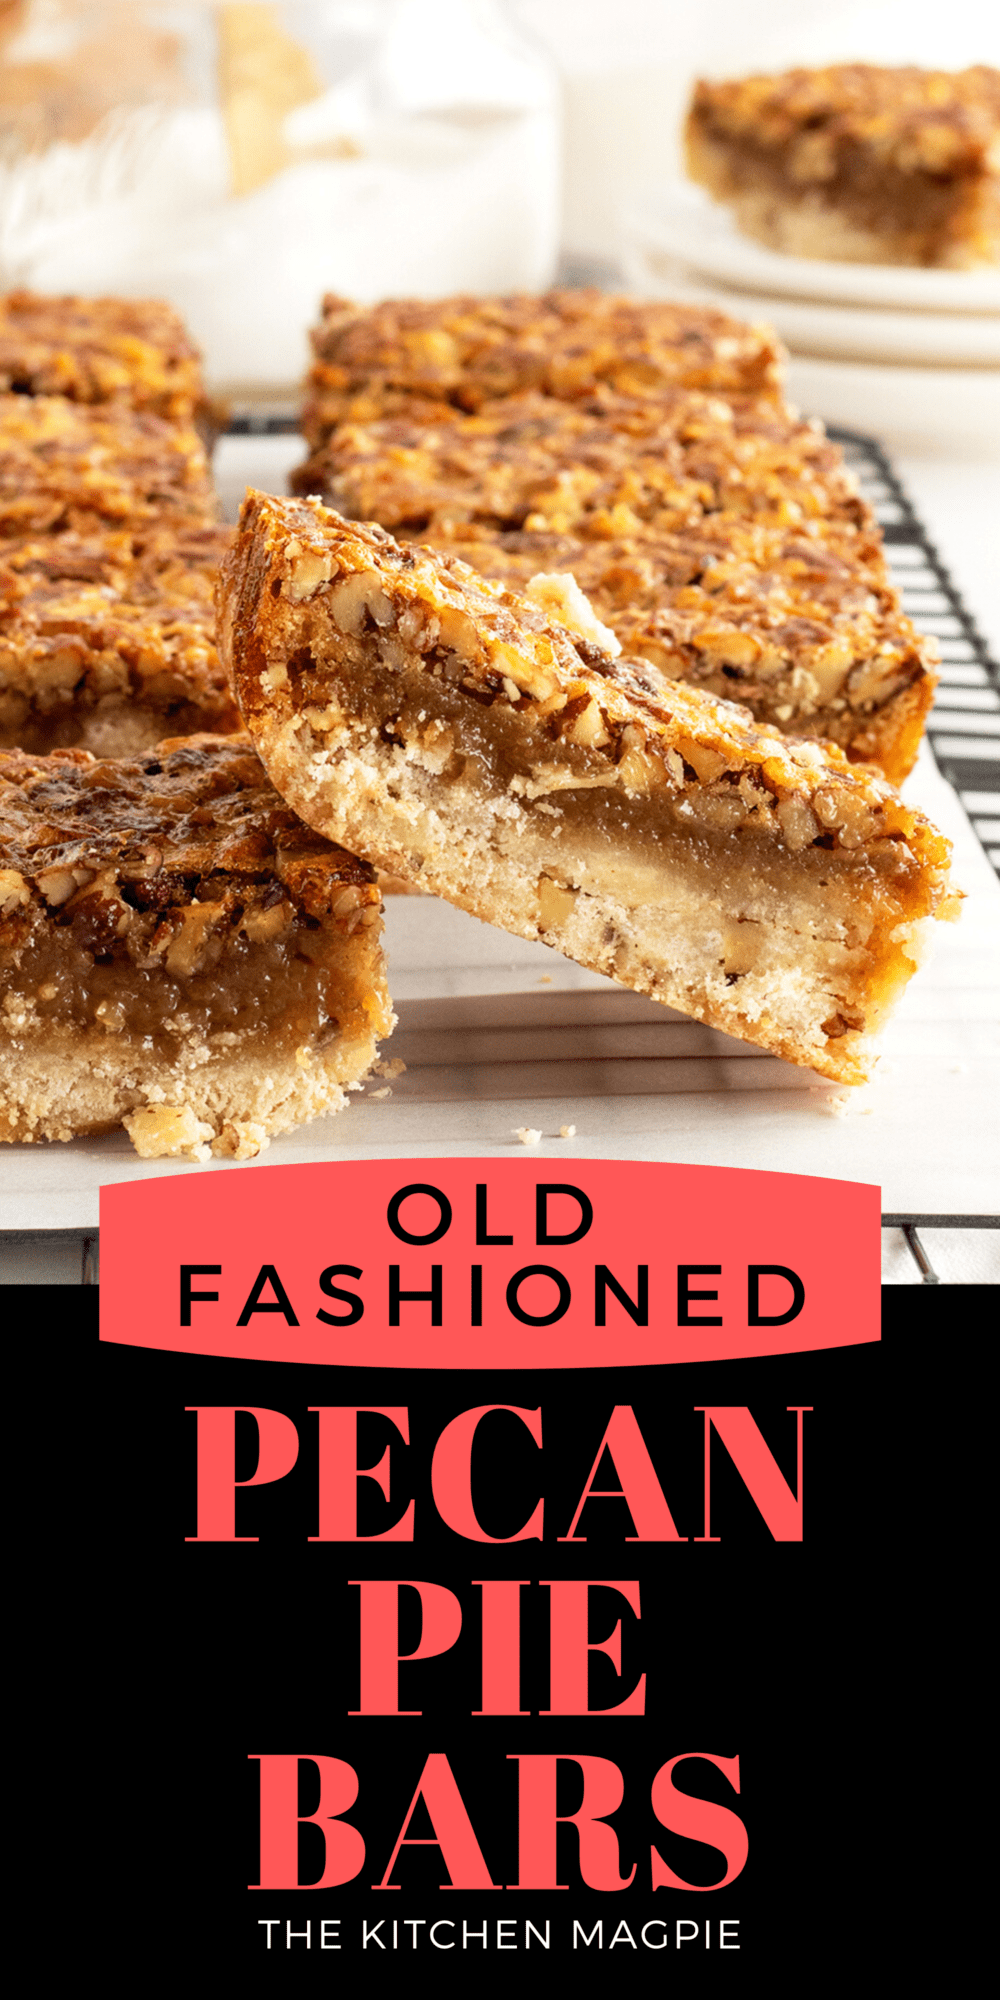 Pecan pie bars combine the warming nuttiness and gooey center of a pie with the convenience of a baked bar.